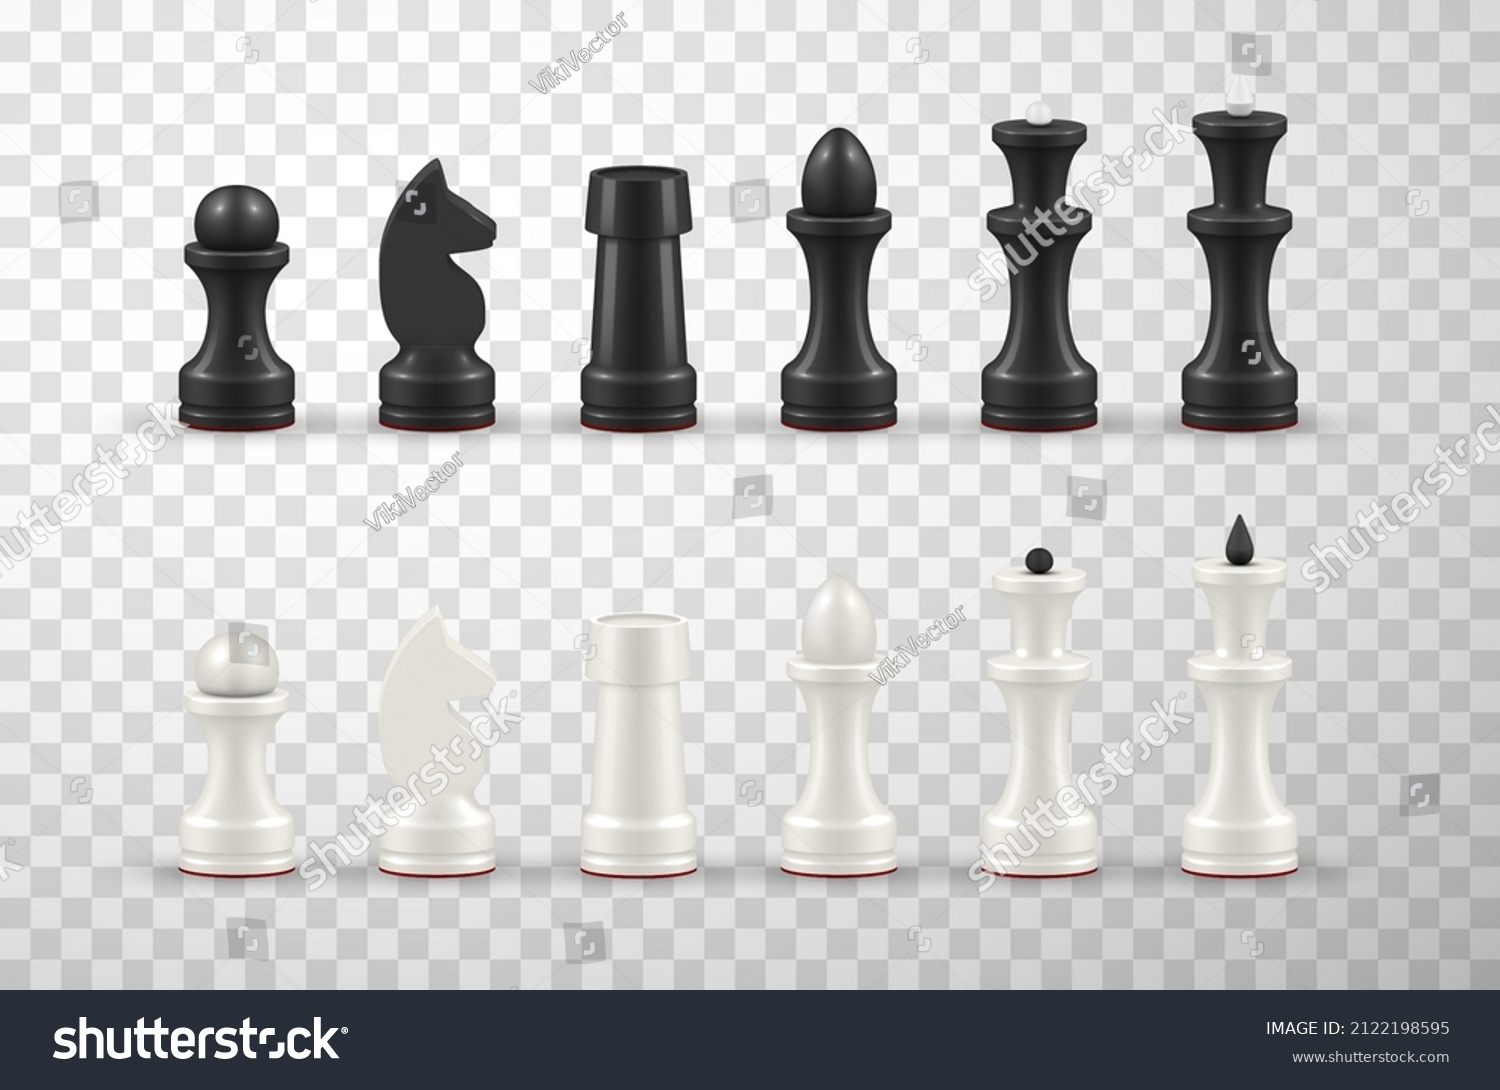 SVG of Realistic black and white all chess pieces set in row 3d template vector illustration. King, queen bishop and pawn horse rook figure isolated on transparent. Competition intelligence game play svg